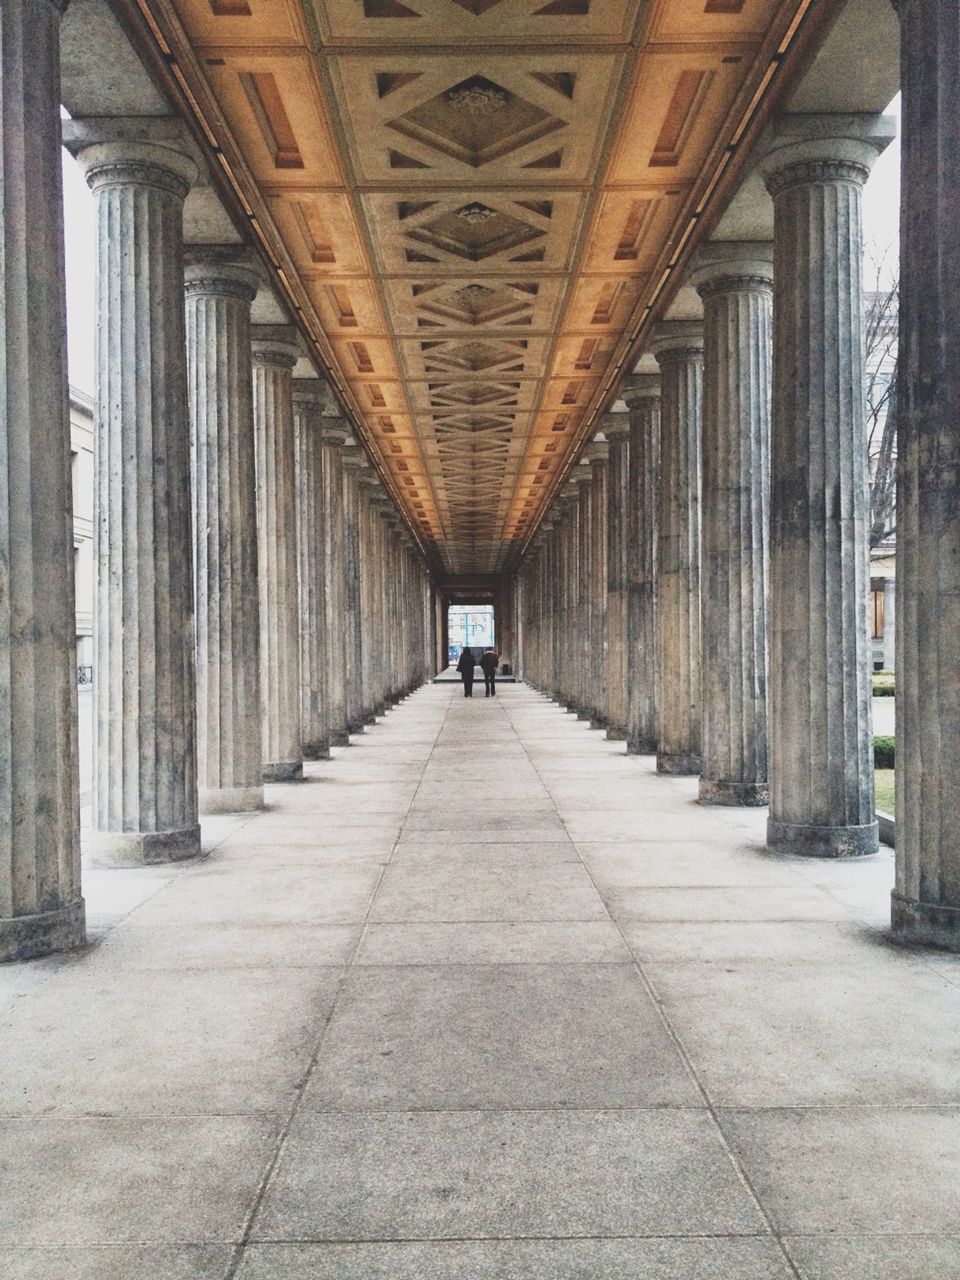 VIEW OF COLONNADE